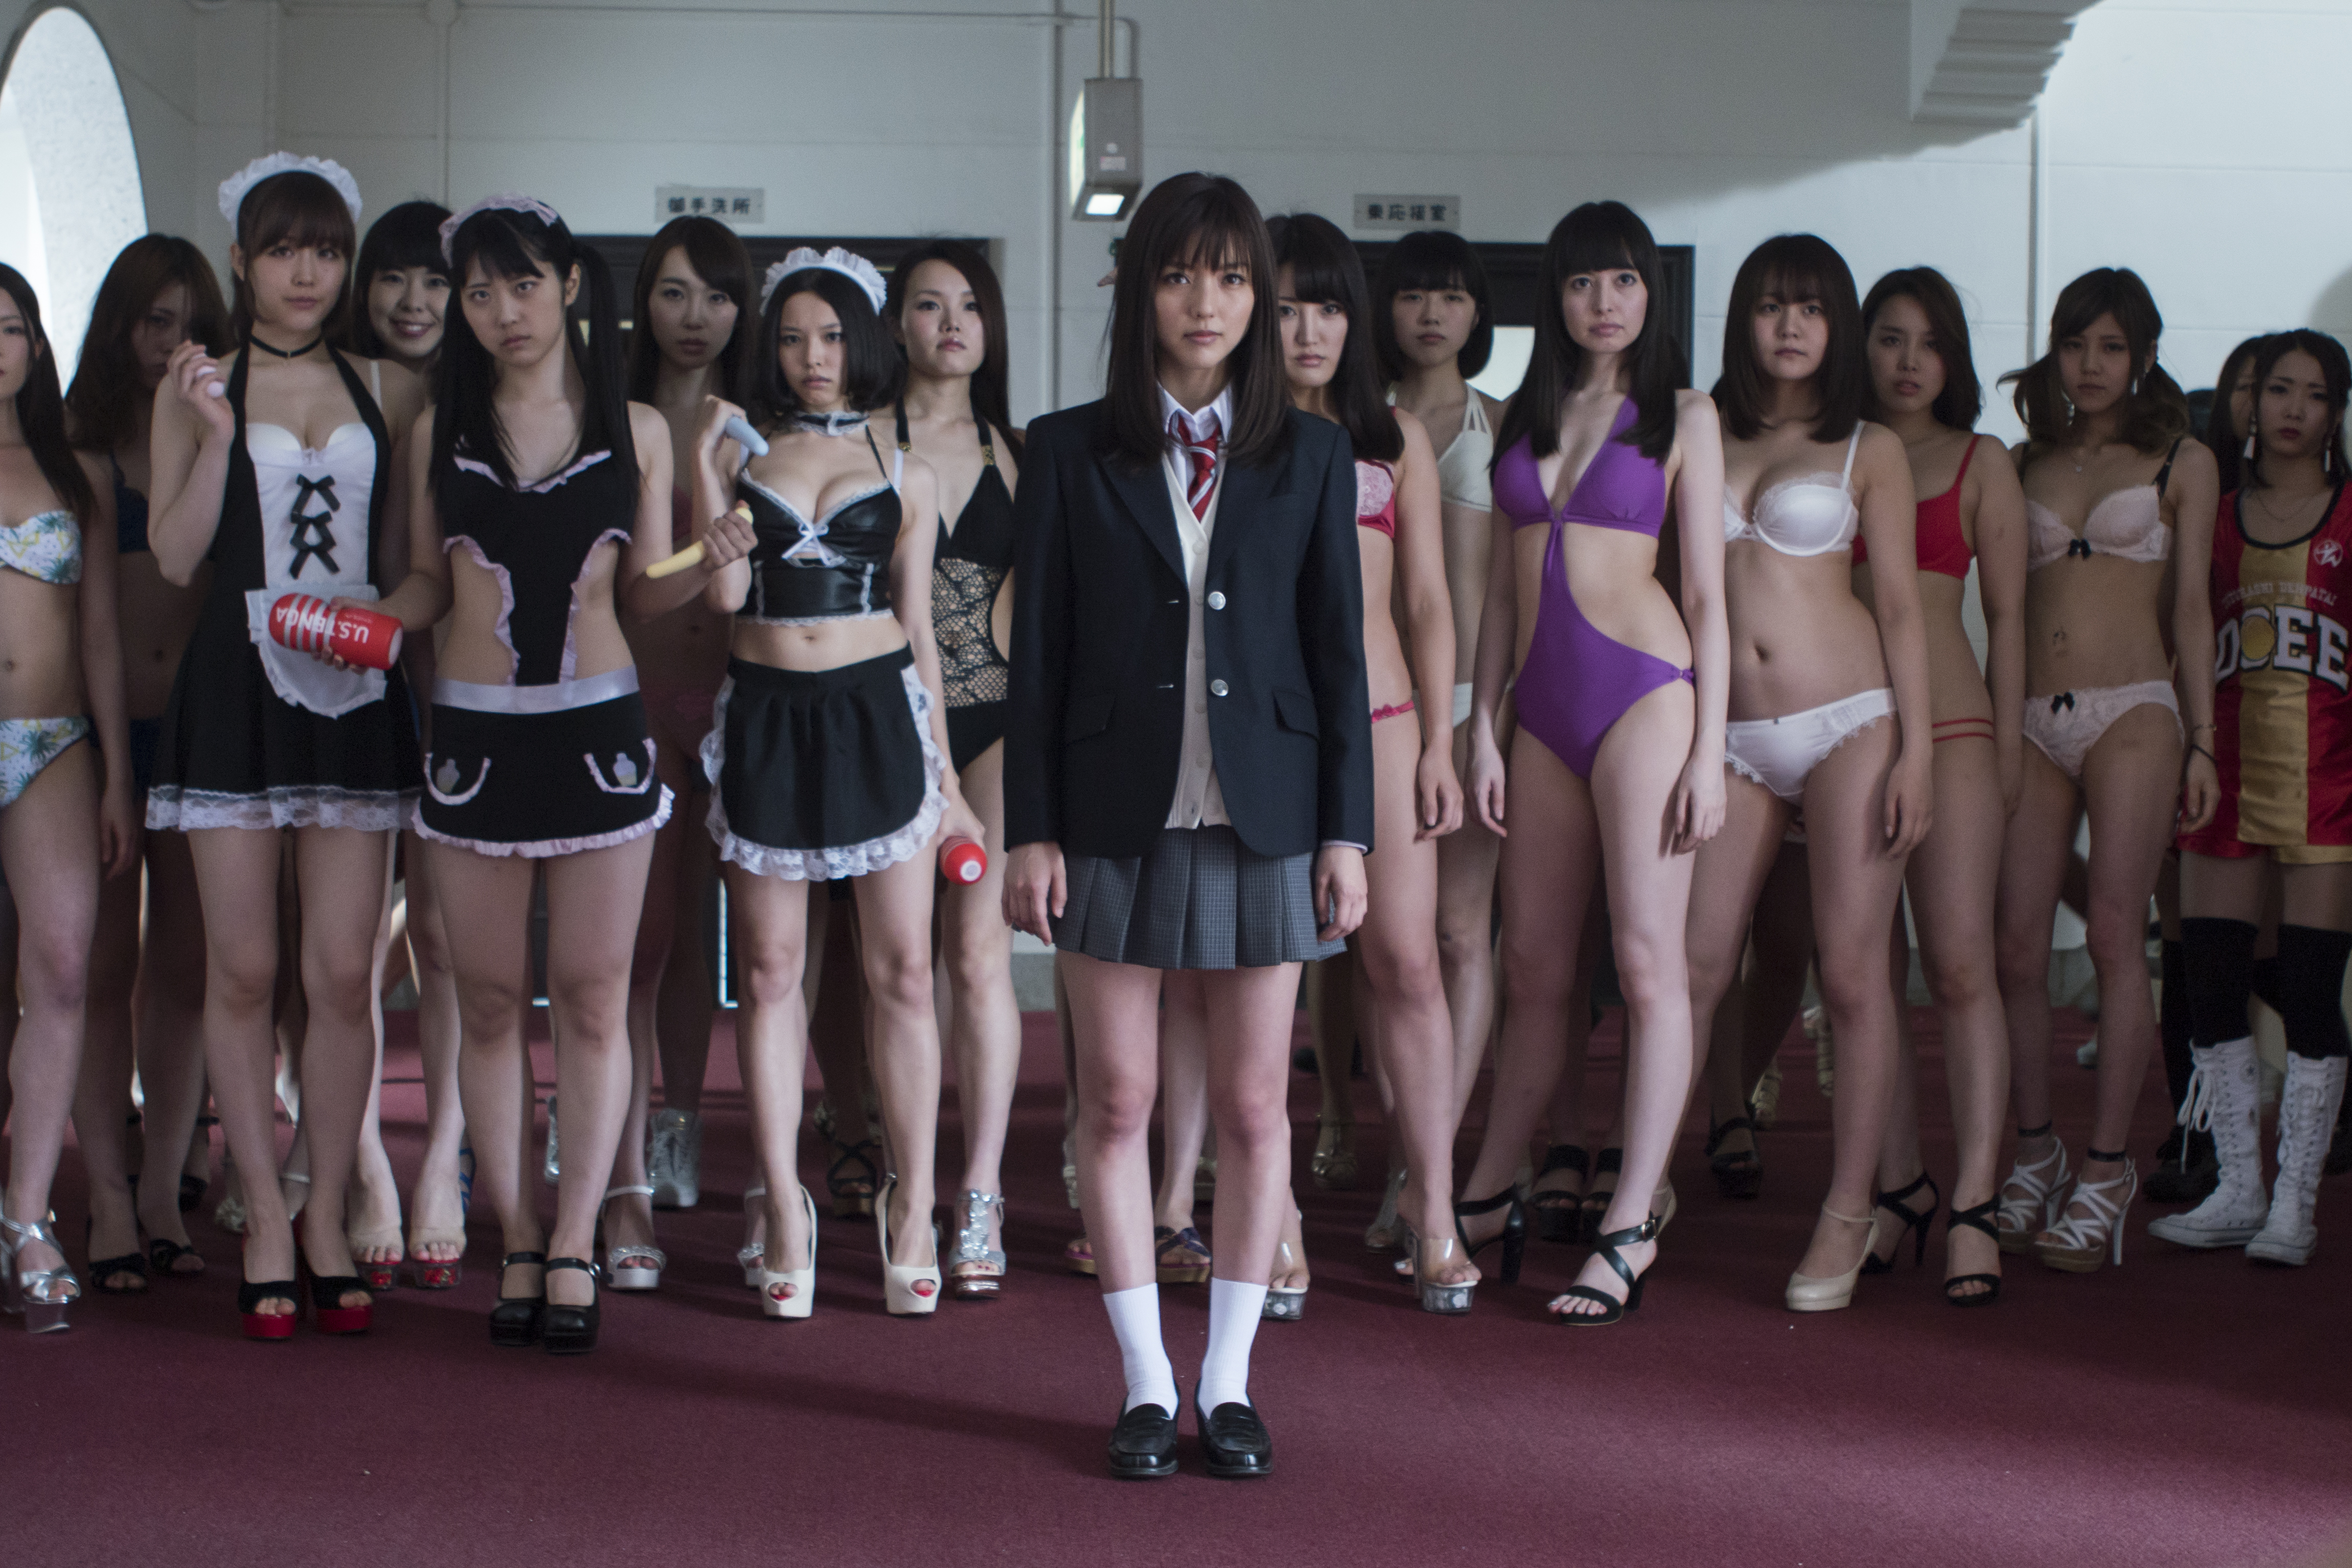 Japanese Schoolgirl Virgin - Film review: Virgin Psychics â€“ Sion Sono's unapologetically bawdy sex  comedy fails to engage | South China Morning Post